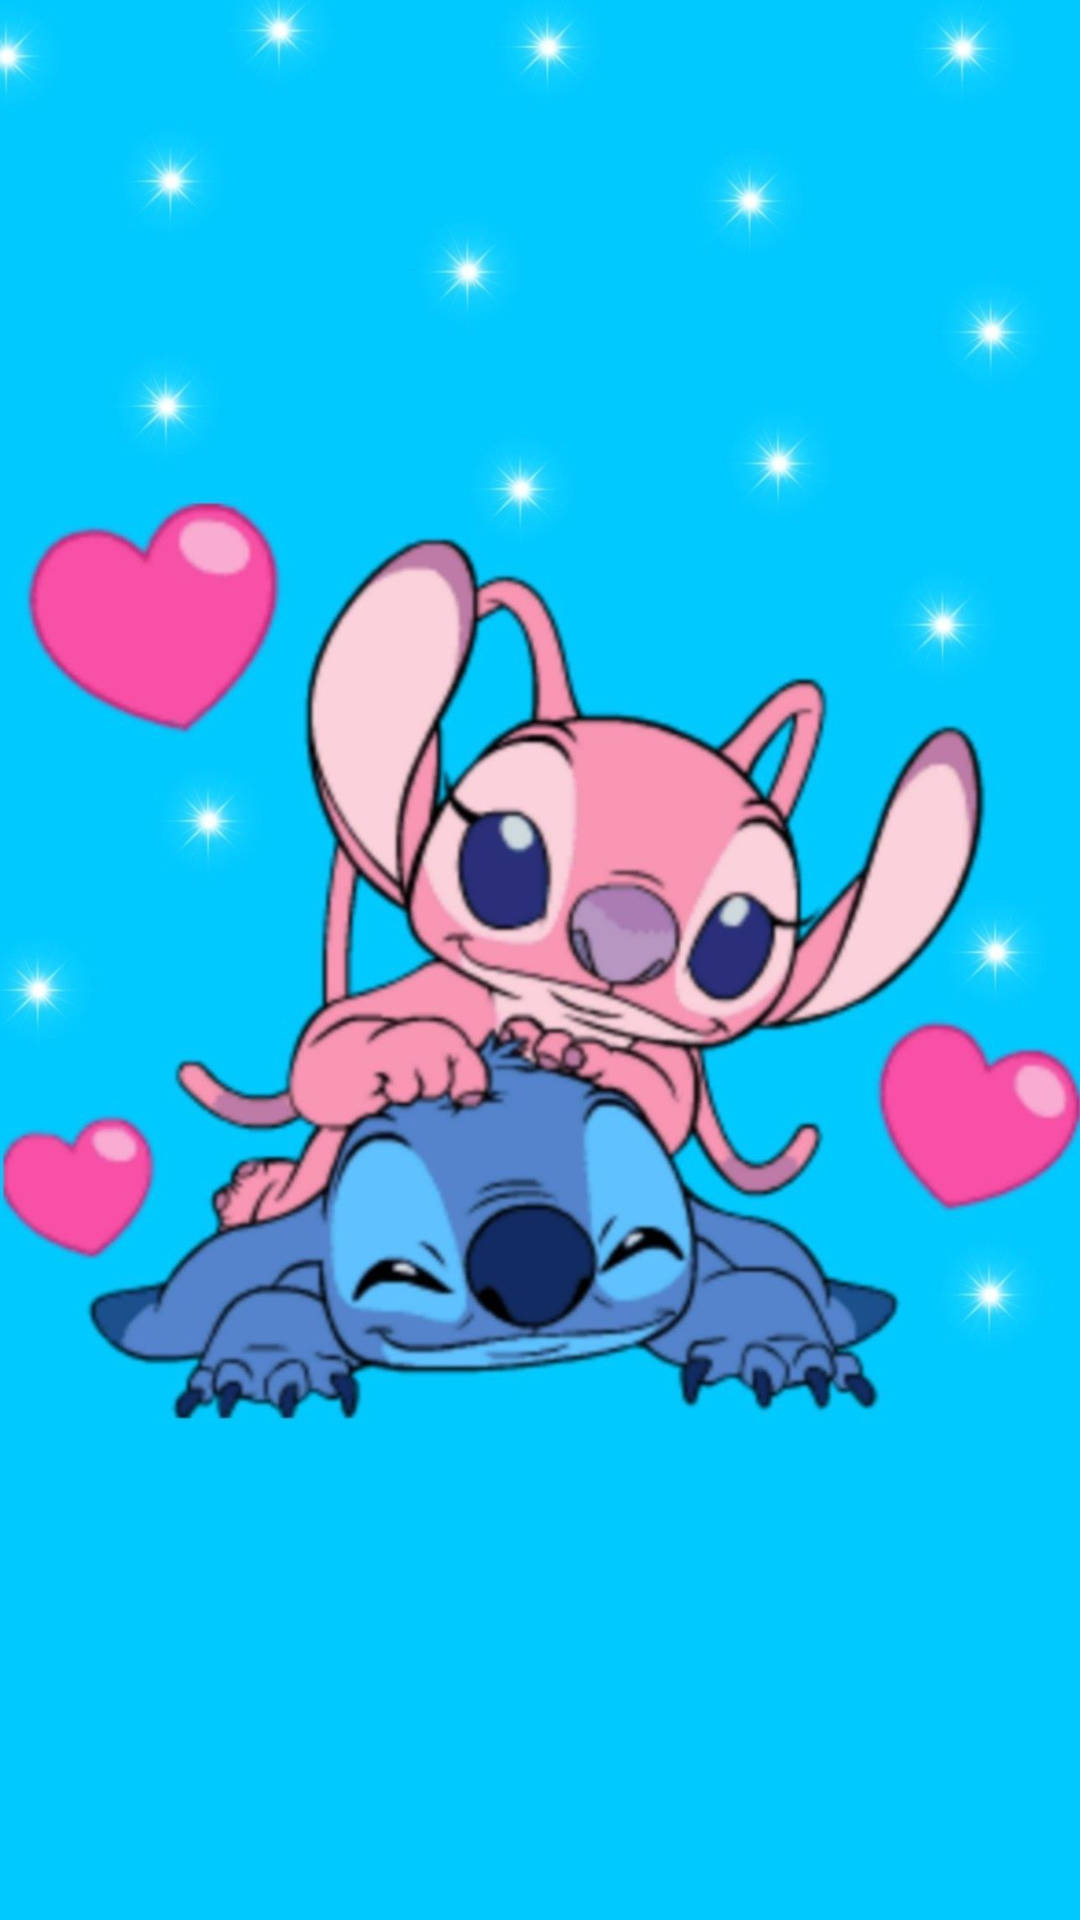 Download Cute Stitch With Angel Wallpaper